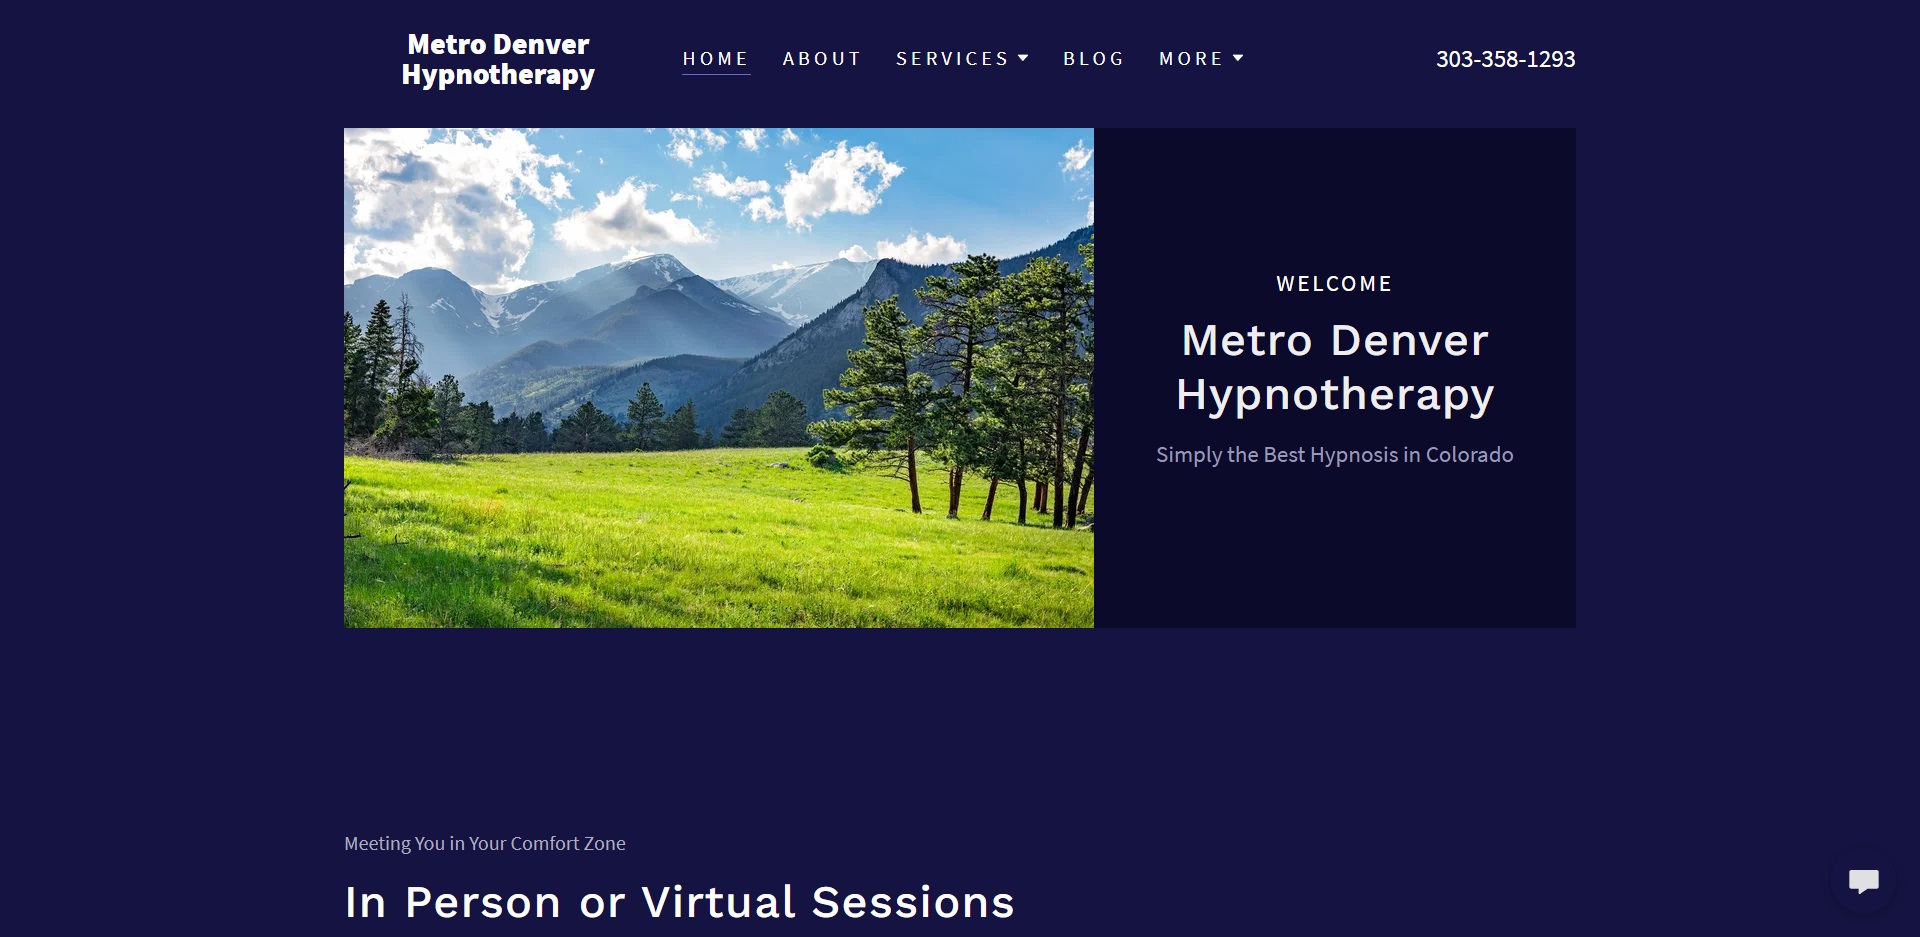 The Best Hypnotherapy in Denver, CO